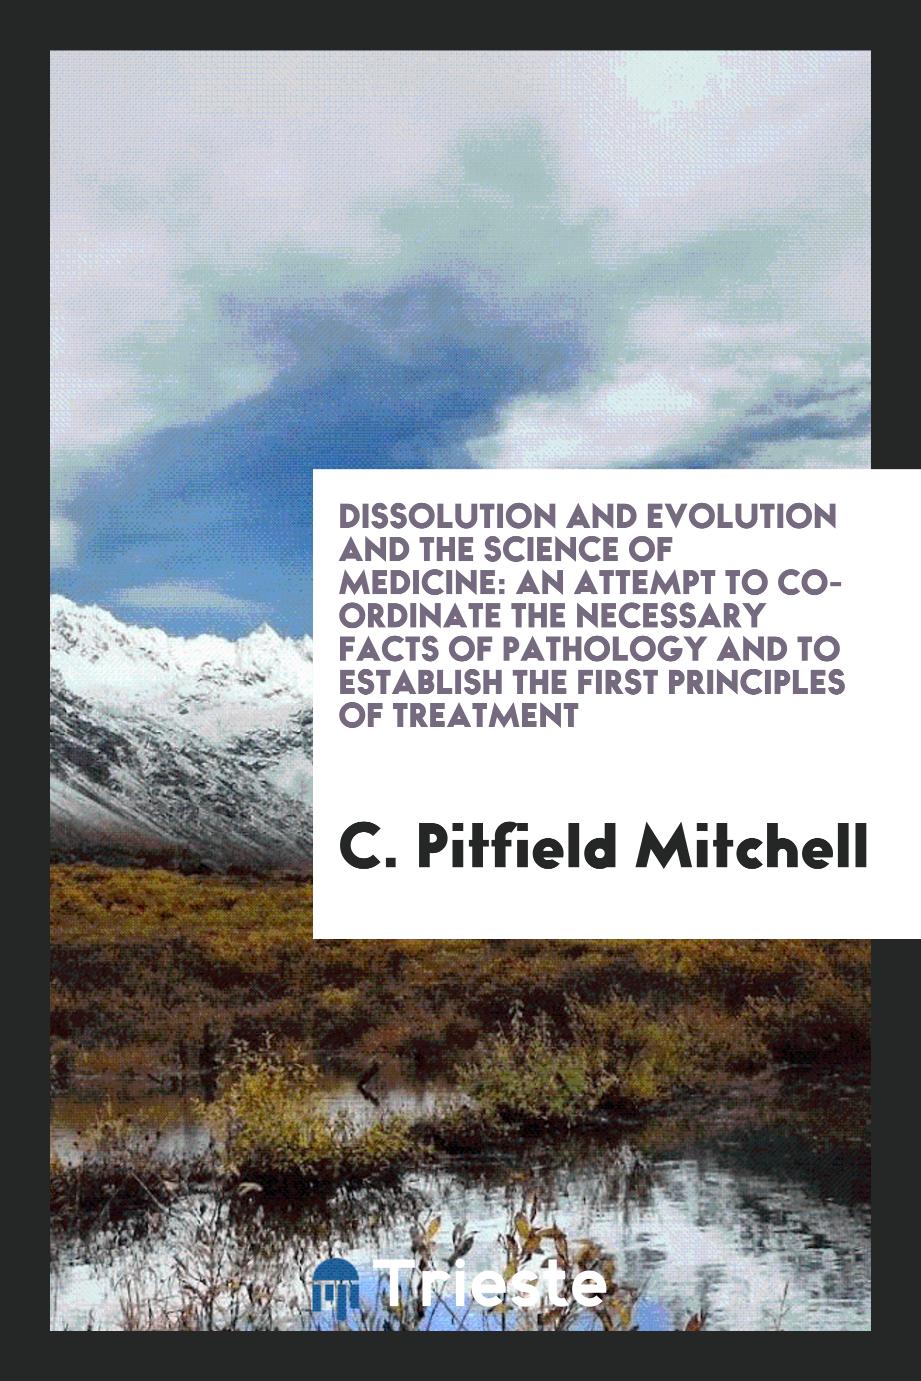 Dissolution and evolution and the science of medicine: an attempt to co-ordinate the necessary facts of pathology and to establish the first principles of treatment